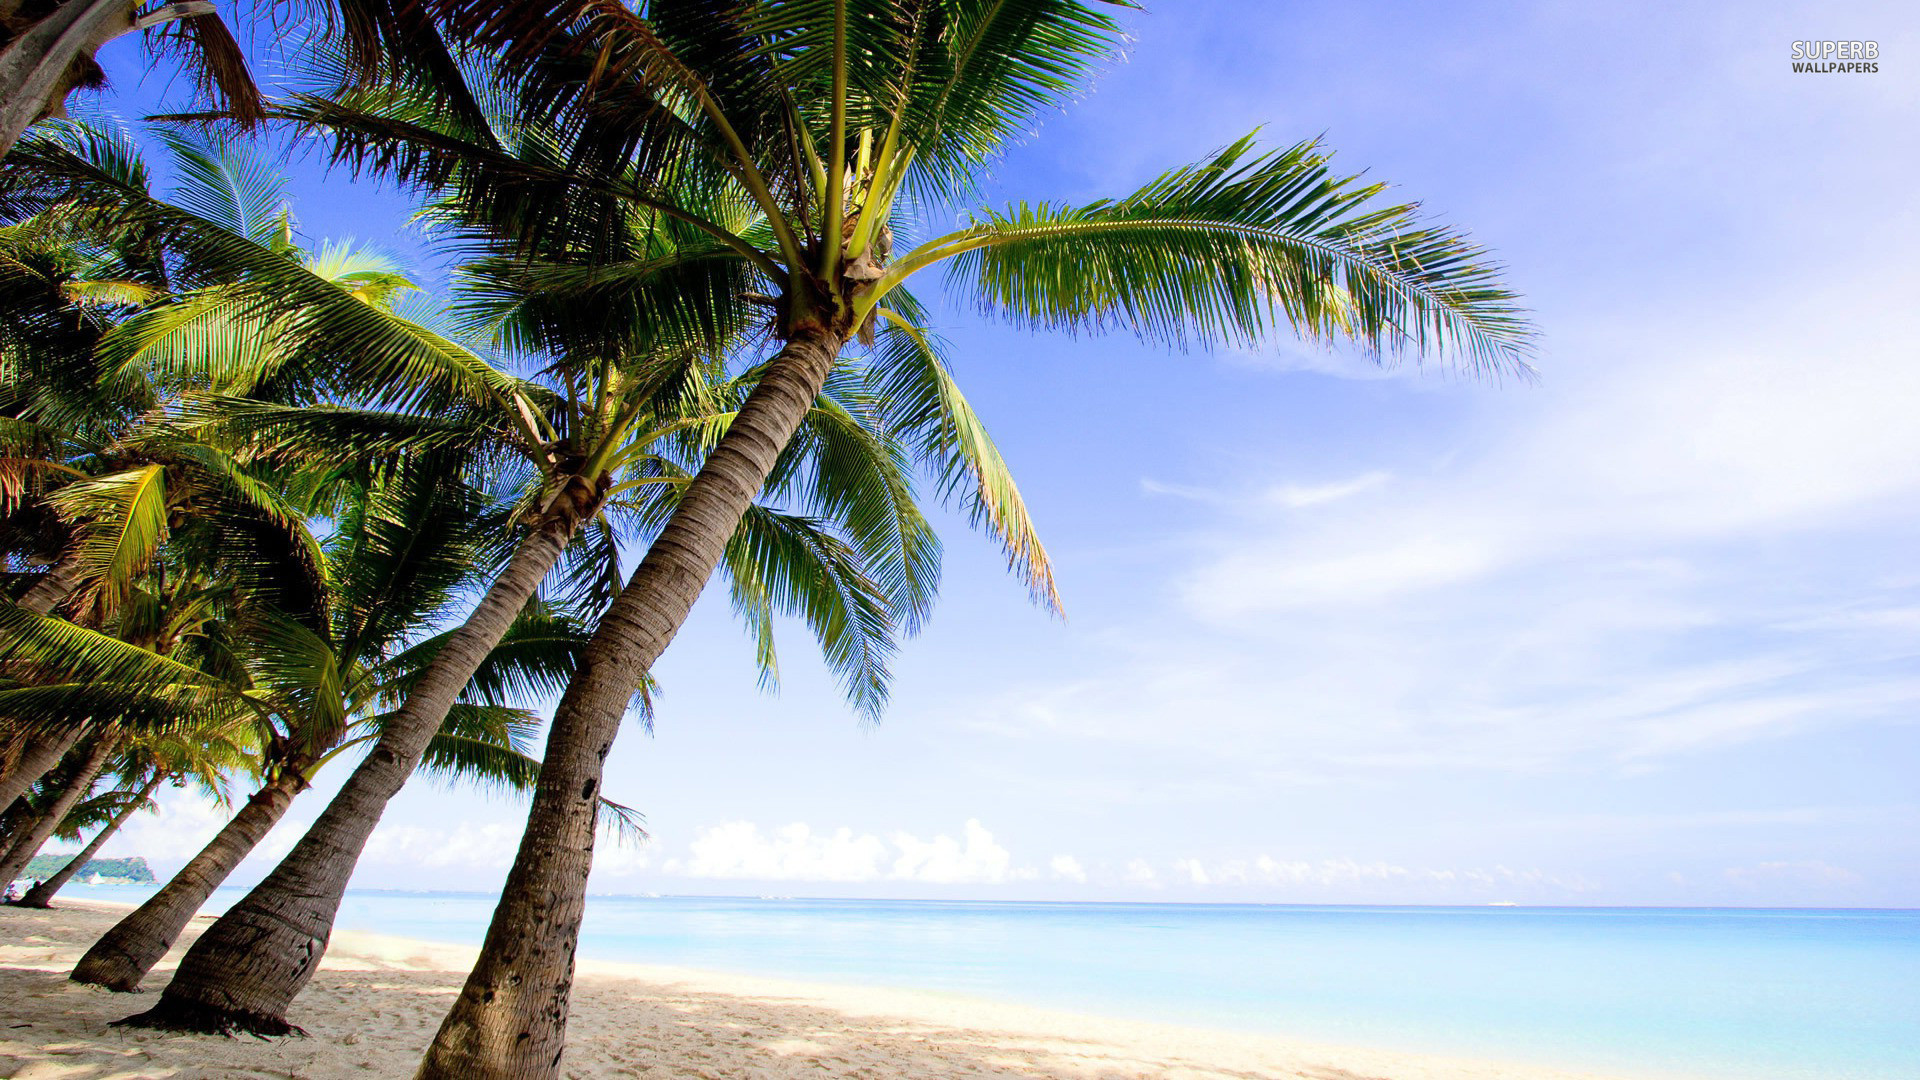 1920x1080 17 Best images about palm tree / beach wallpaper borders on